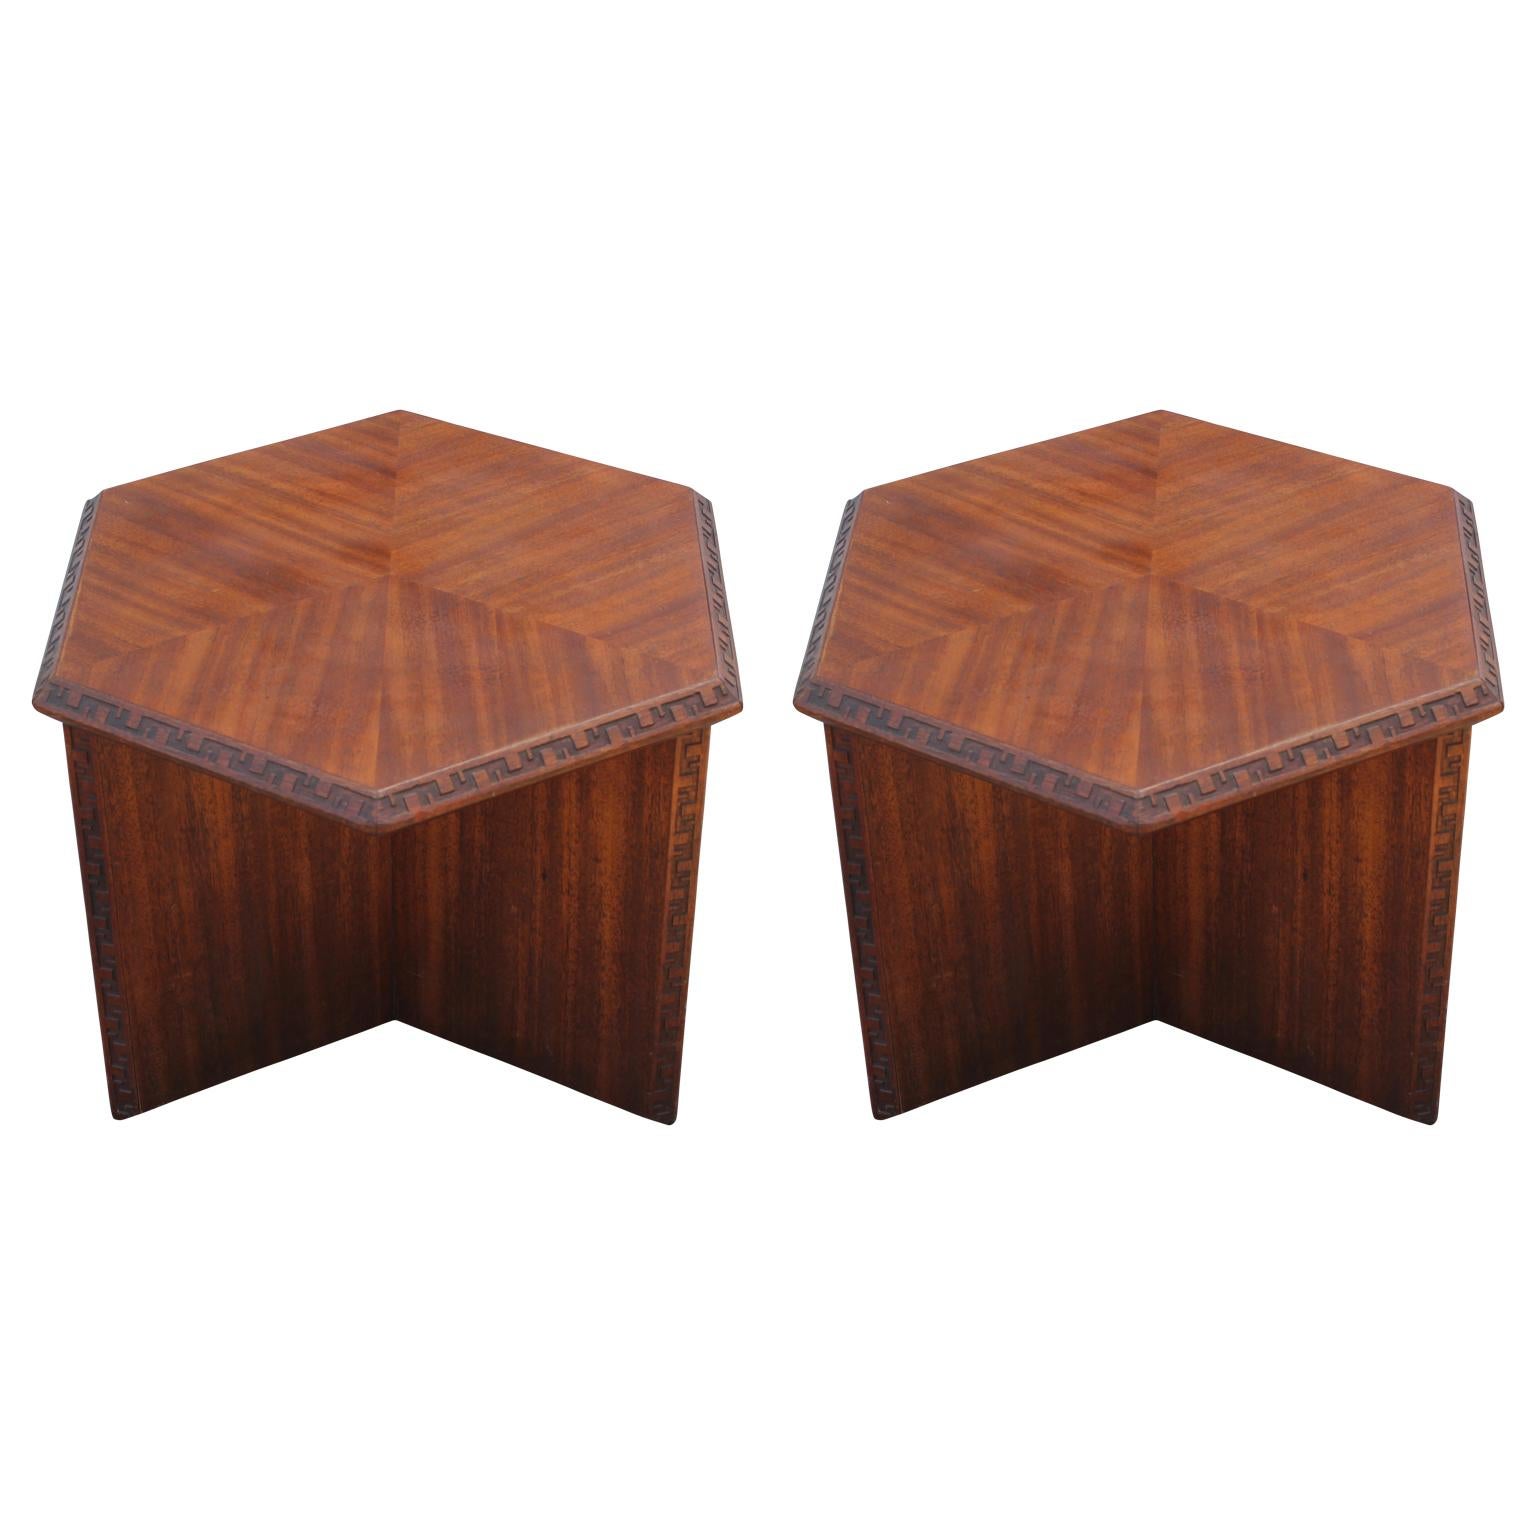 Pair of Signed Hexagon Greek Key End Tables by Frank Lloyd Wright for Henredon